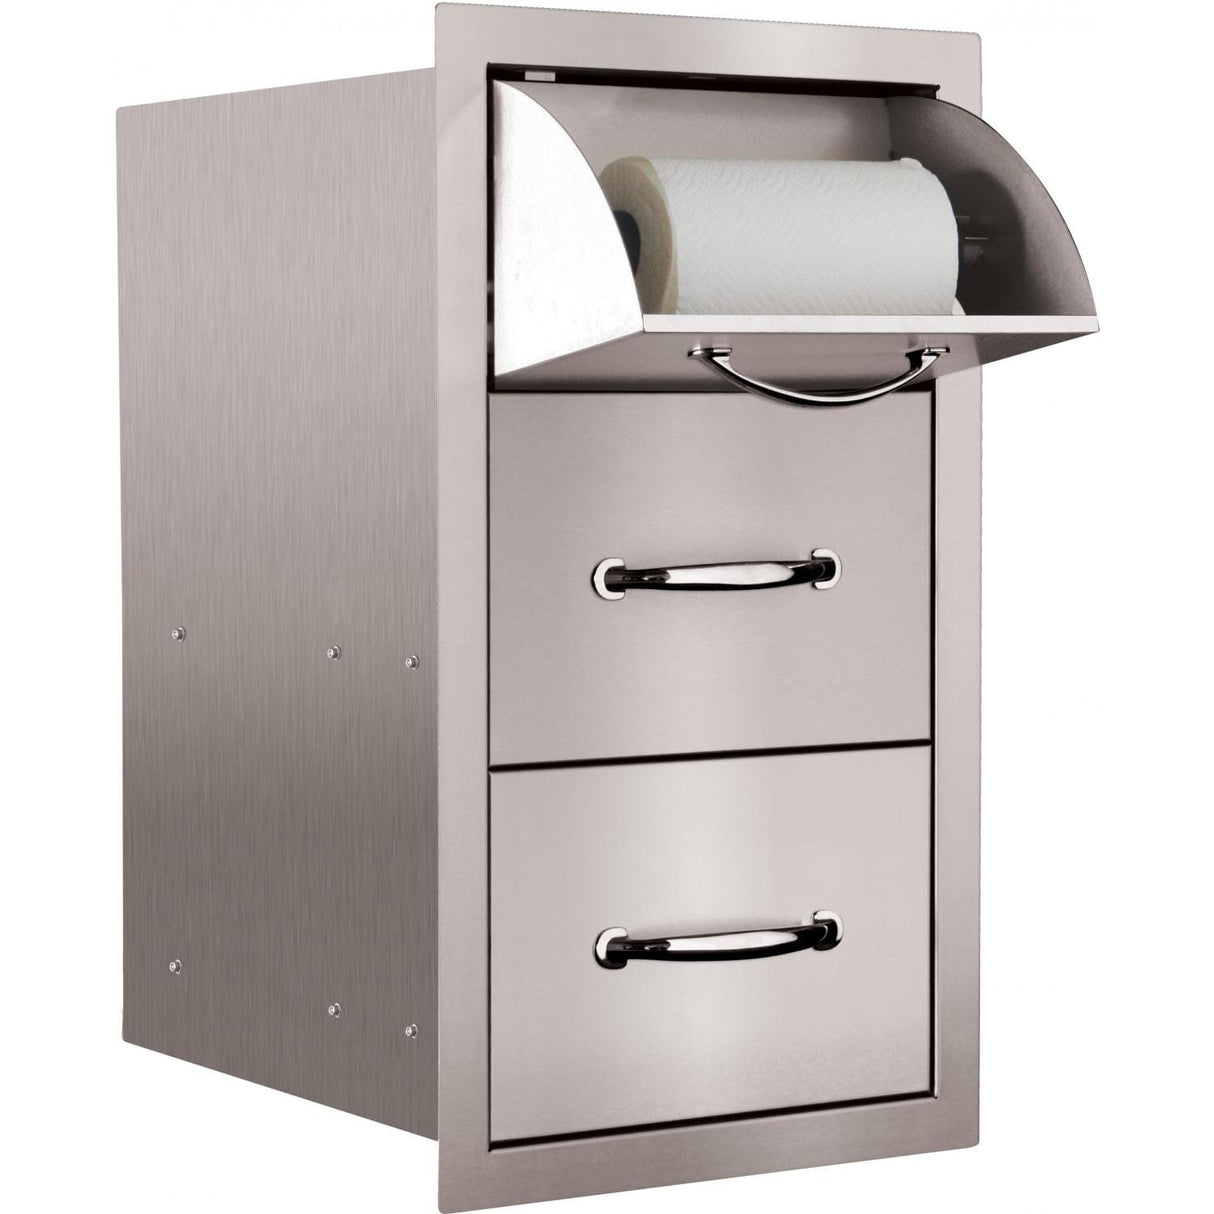 Summerset 15-Inch Stainless Steel Flush Mount Double Access Drawer With Paper Towel Holder - SSTDC-17